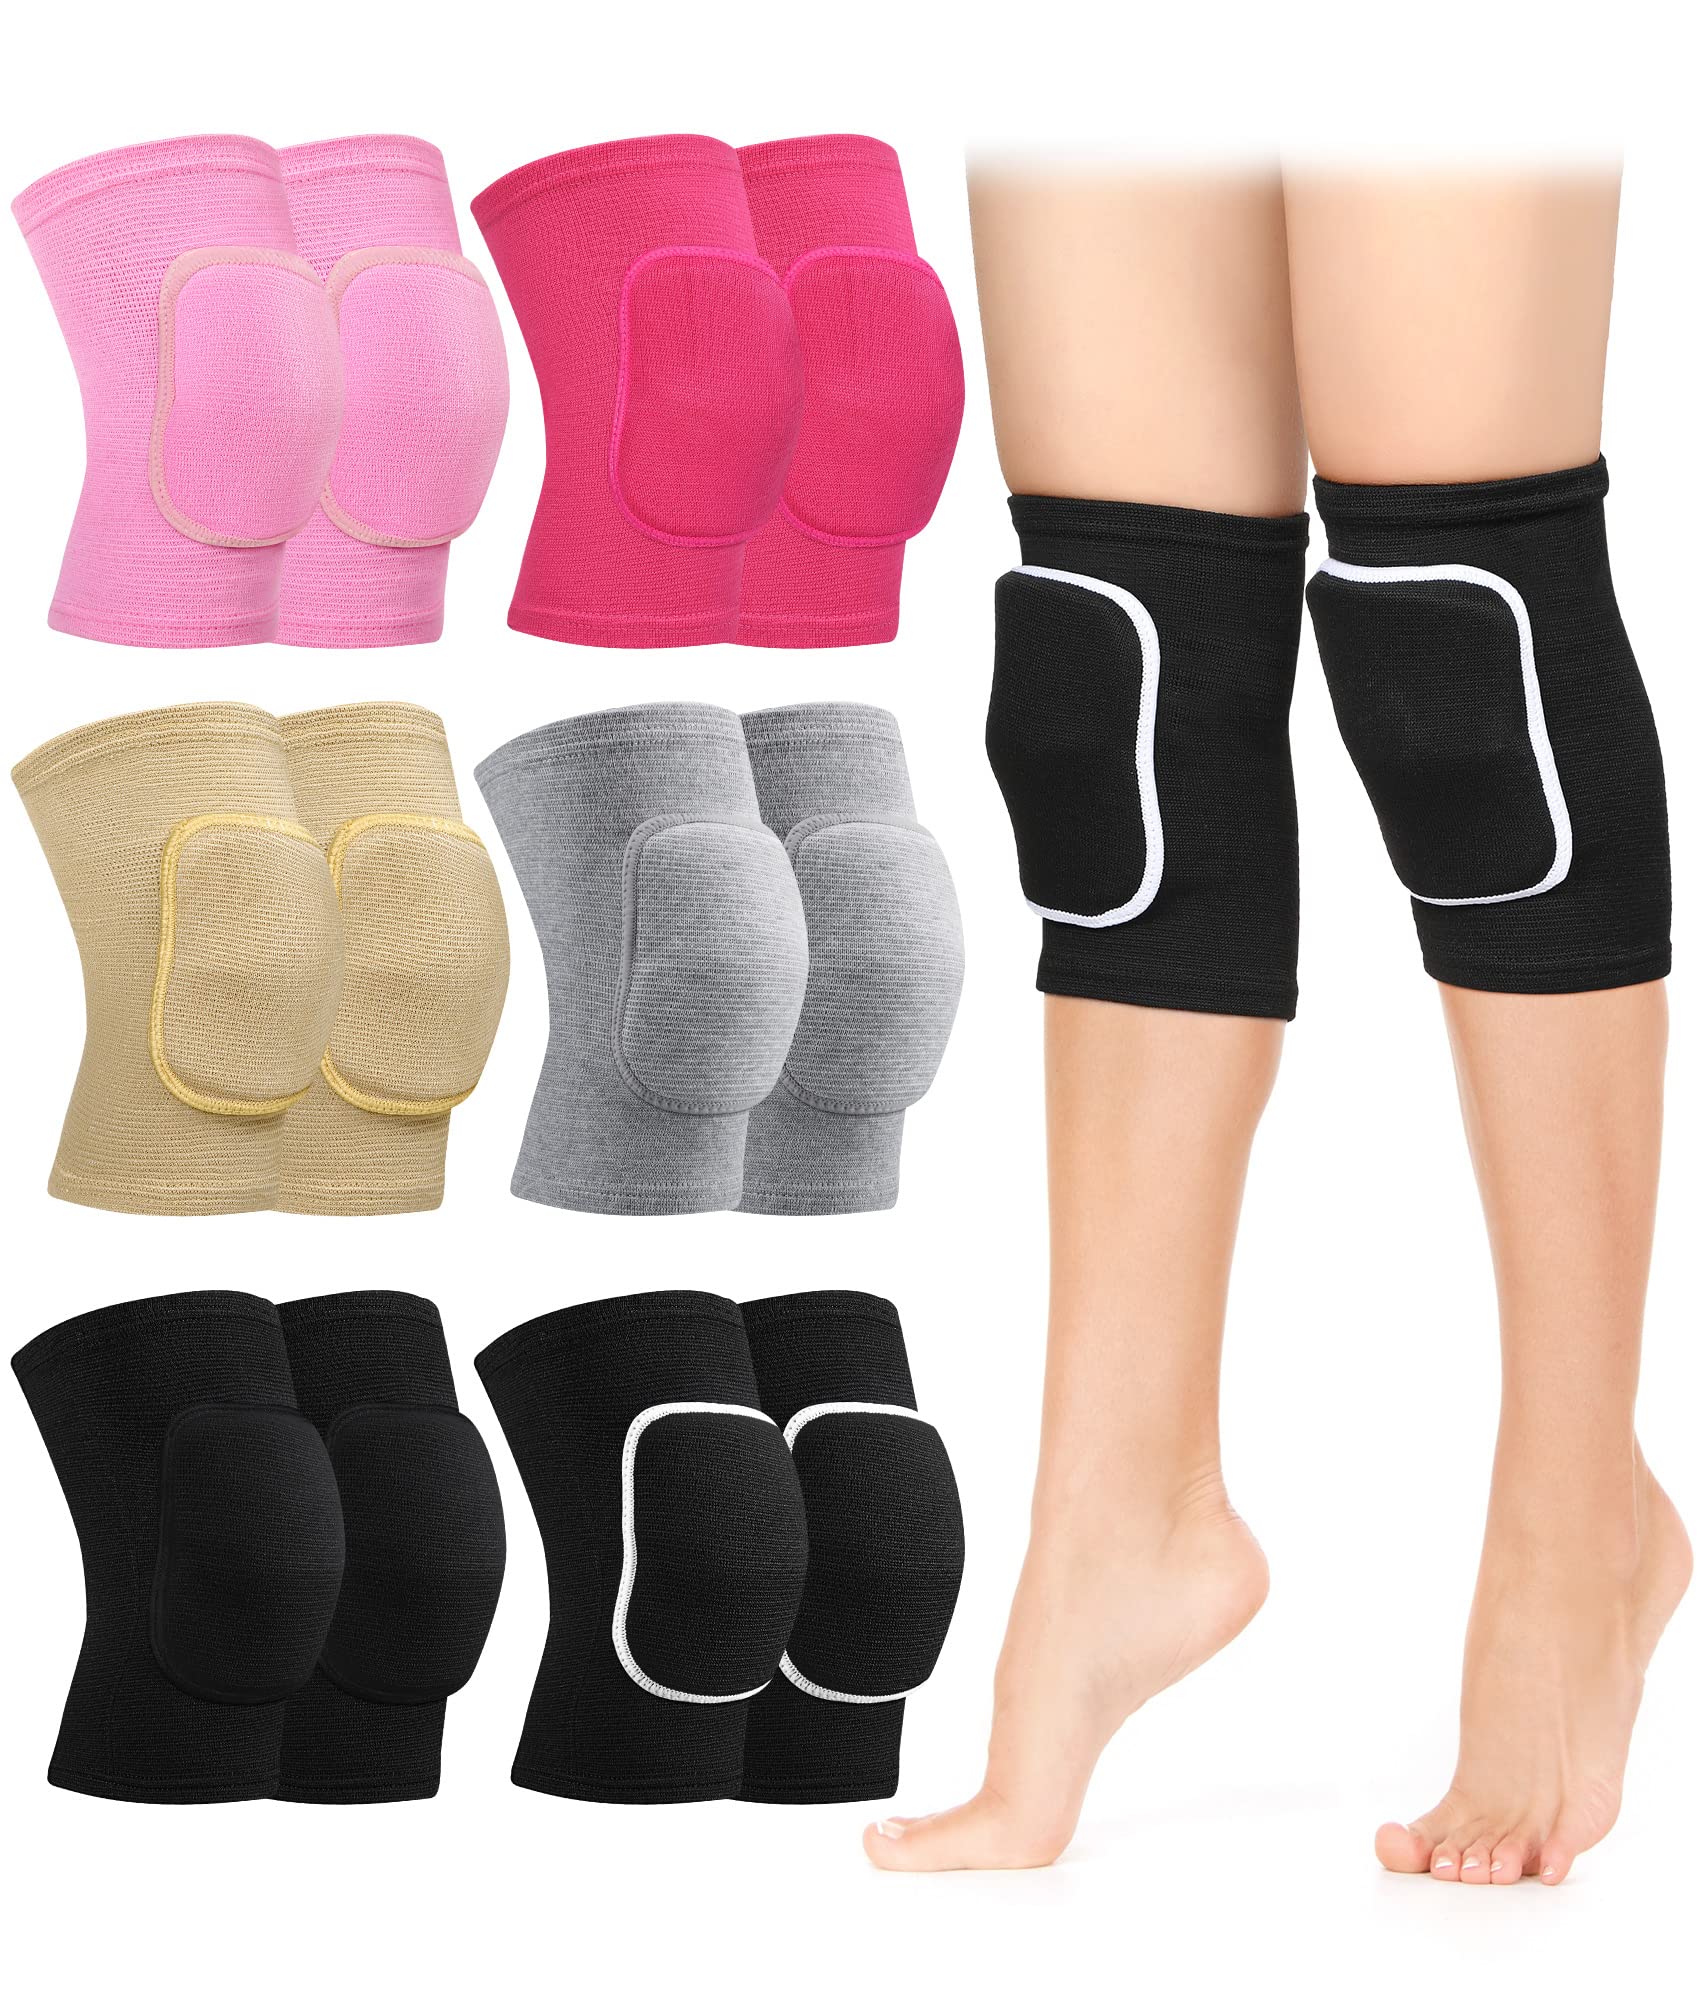 Eurzom 6 Pairs Dance Knee Pads Protective Knee Pads for Dancers